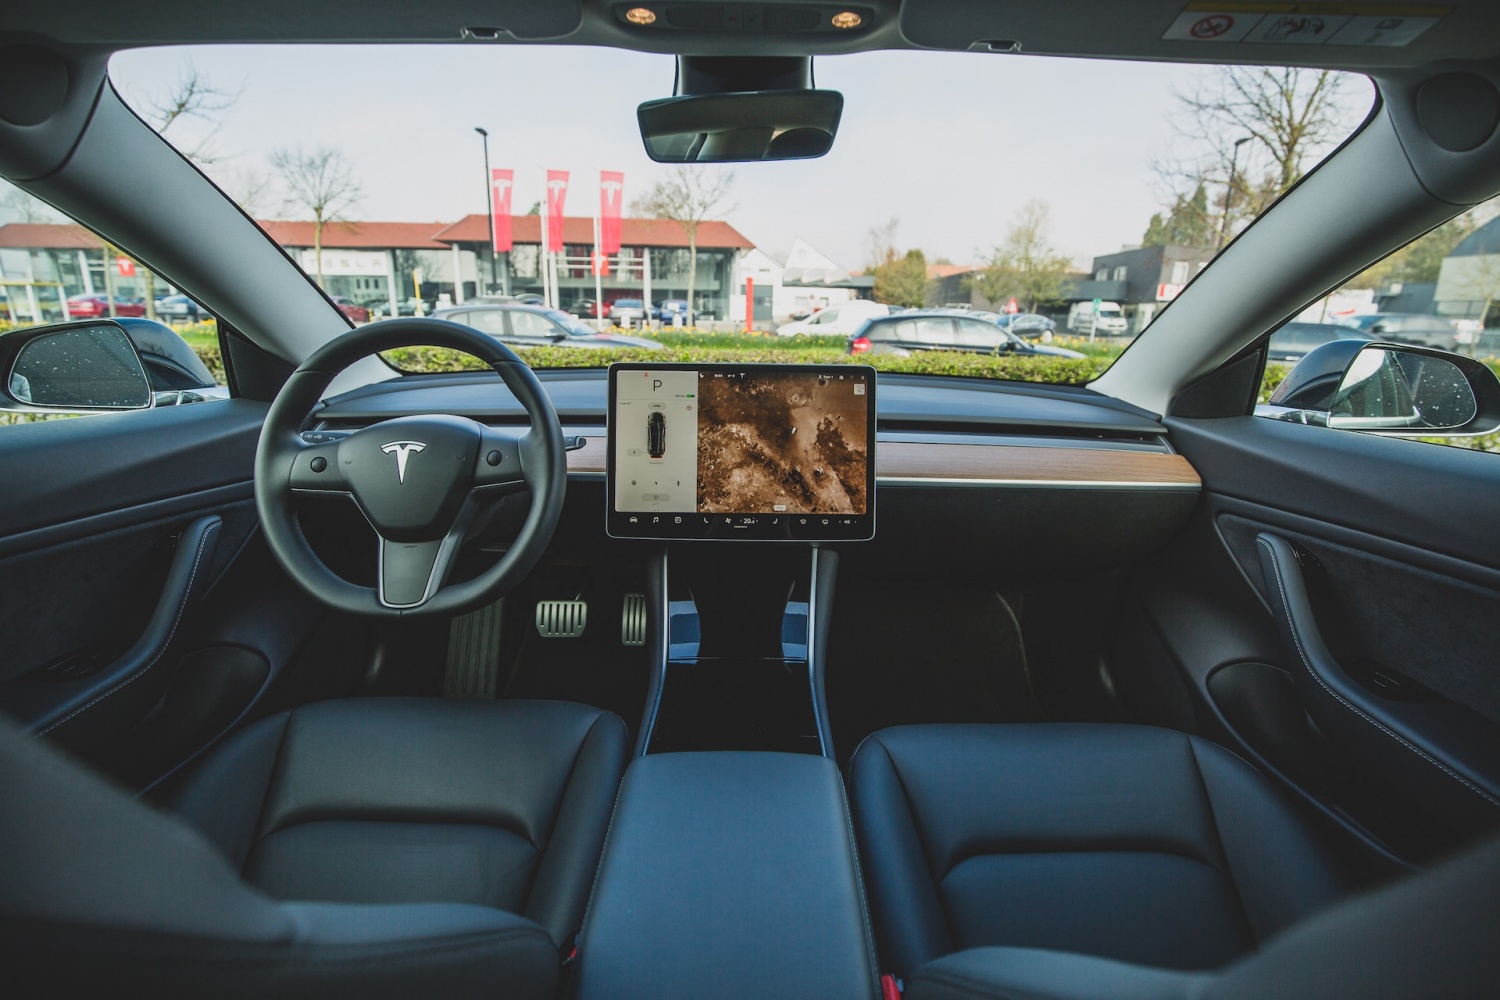 Tesla Said Cars Could Record Photos and Videos from Users Without Them Knowing